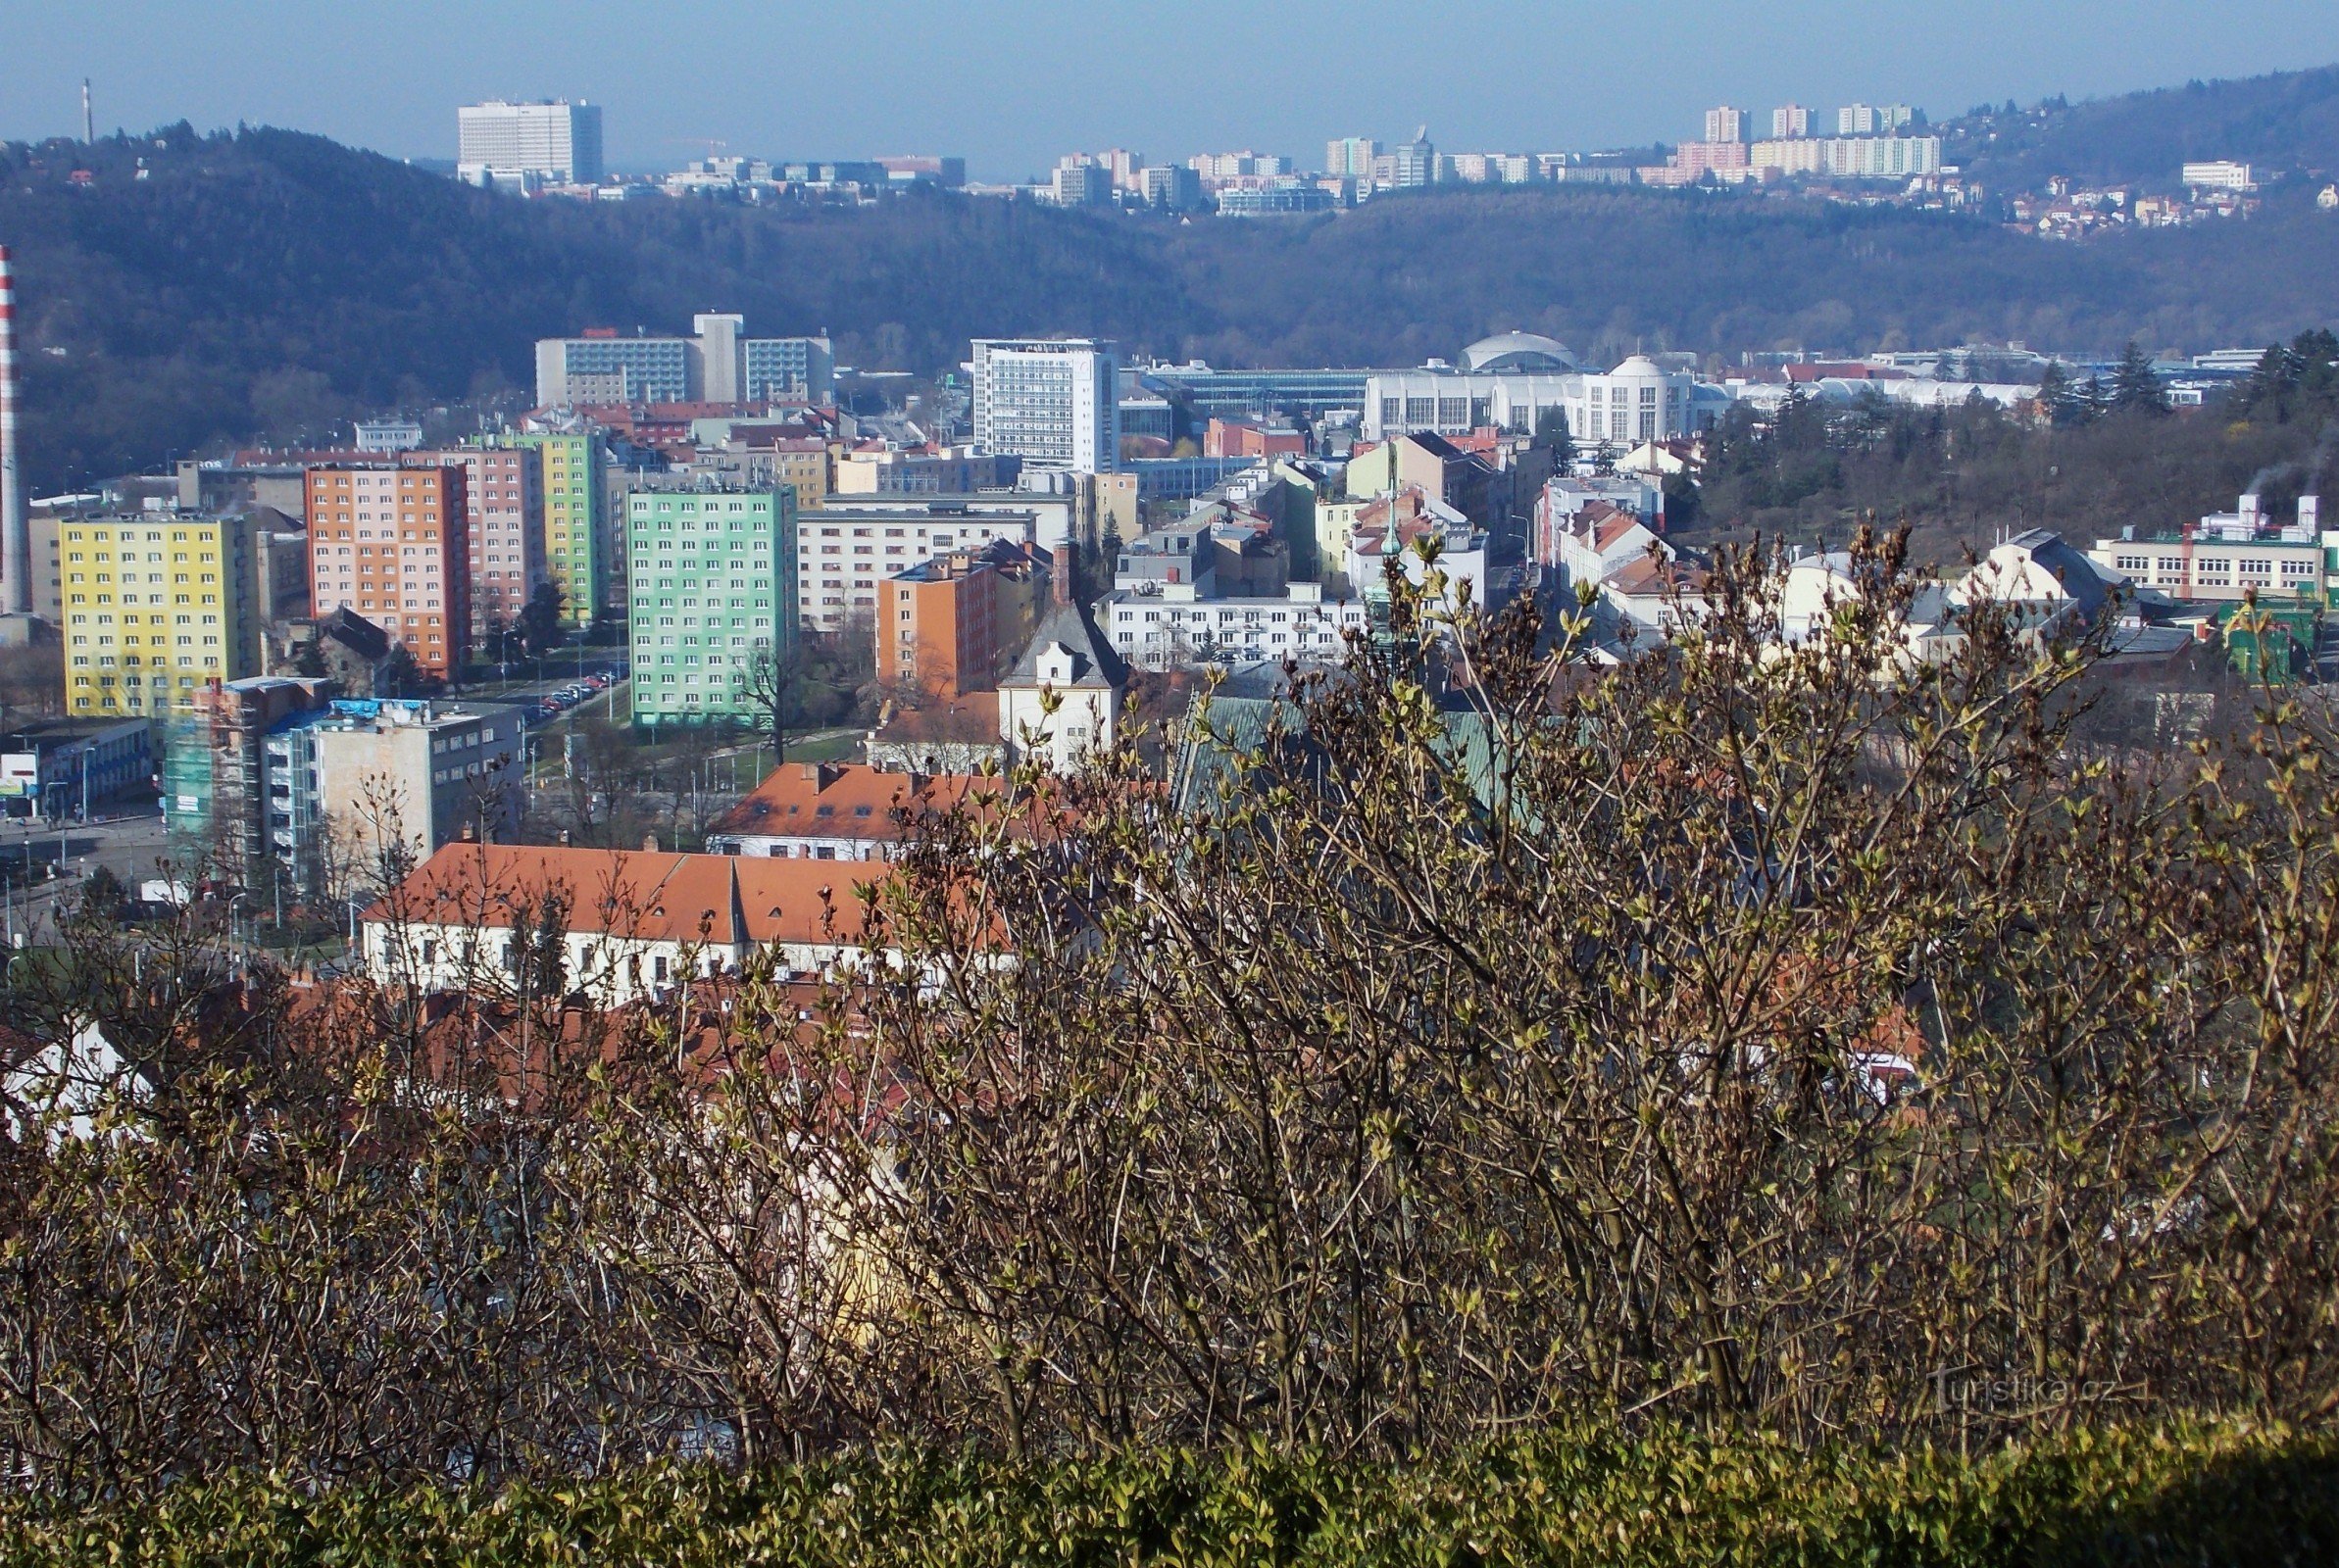 Brno - the city under the sign of the dragon